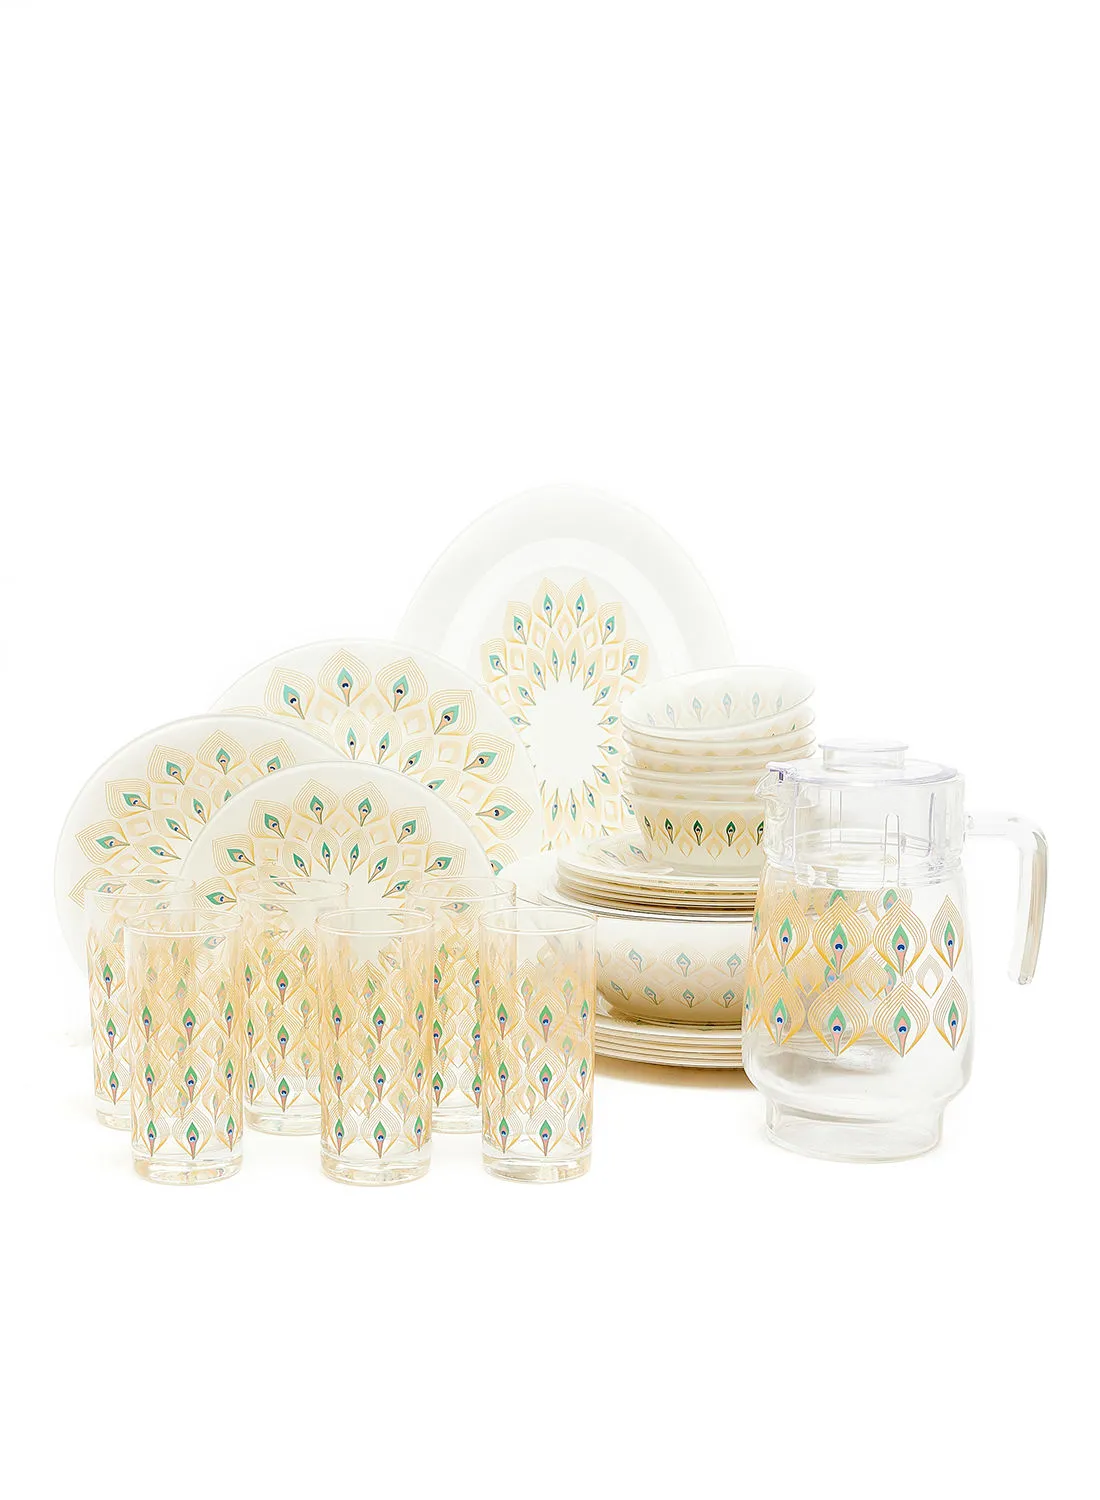 noon east 34 Piece Glass Dinner Set For Everyday Use - Light Weight Dishes, Plates - Dinner Plate, Side Plate, Bowl - Serves 6 - Printed Design Niran